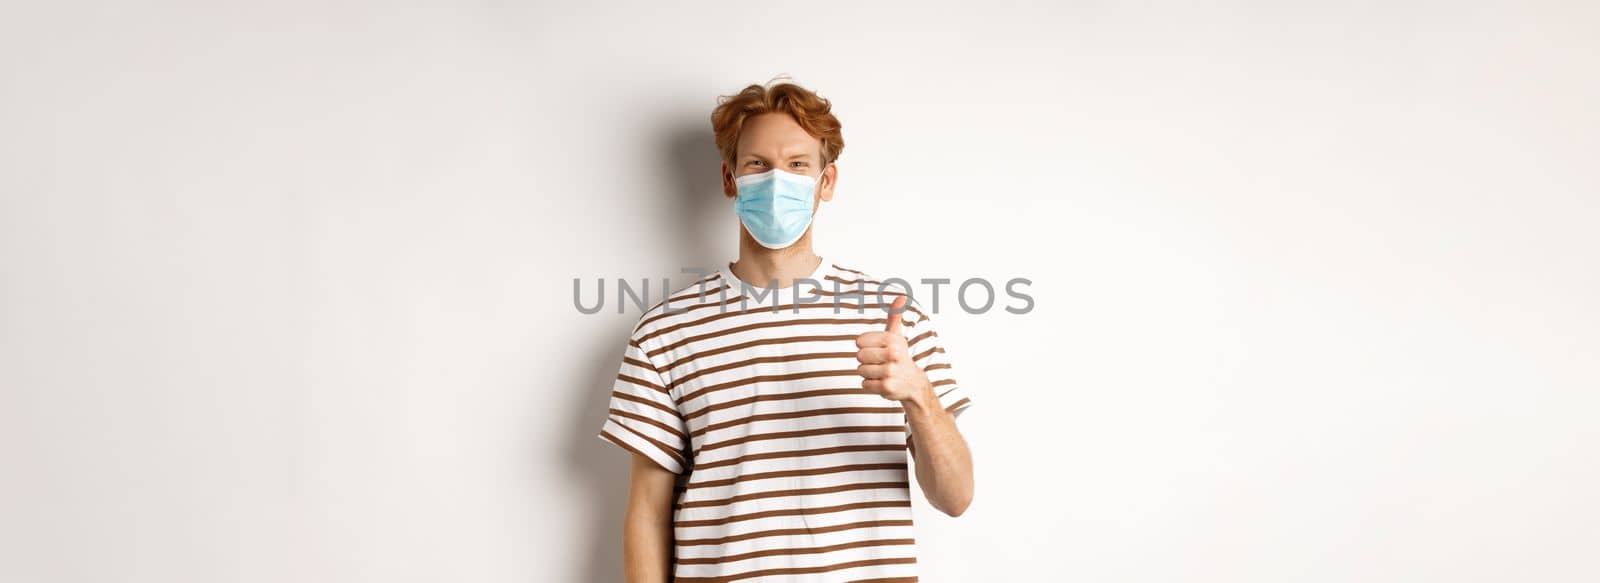 Covid-19, pandemic and social distancing concept. Young man with red hair wearing medical mask to prevent catching coronavirus, showing thumbs-up, white background by Benzoix